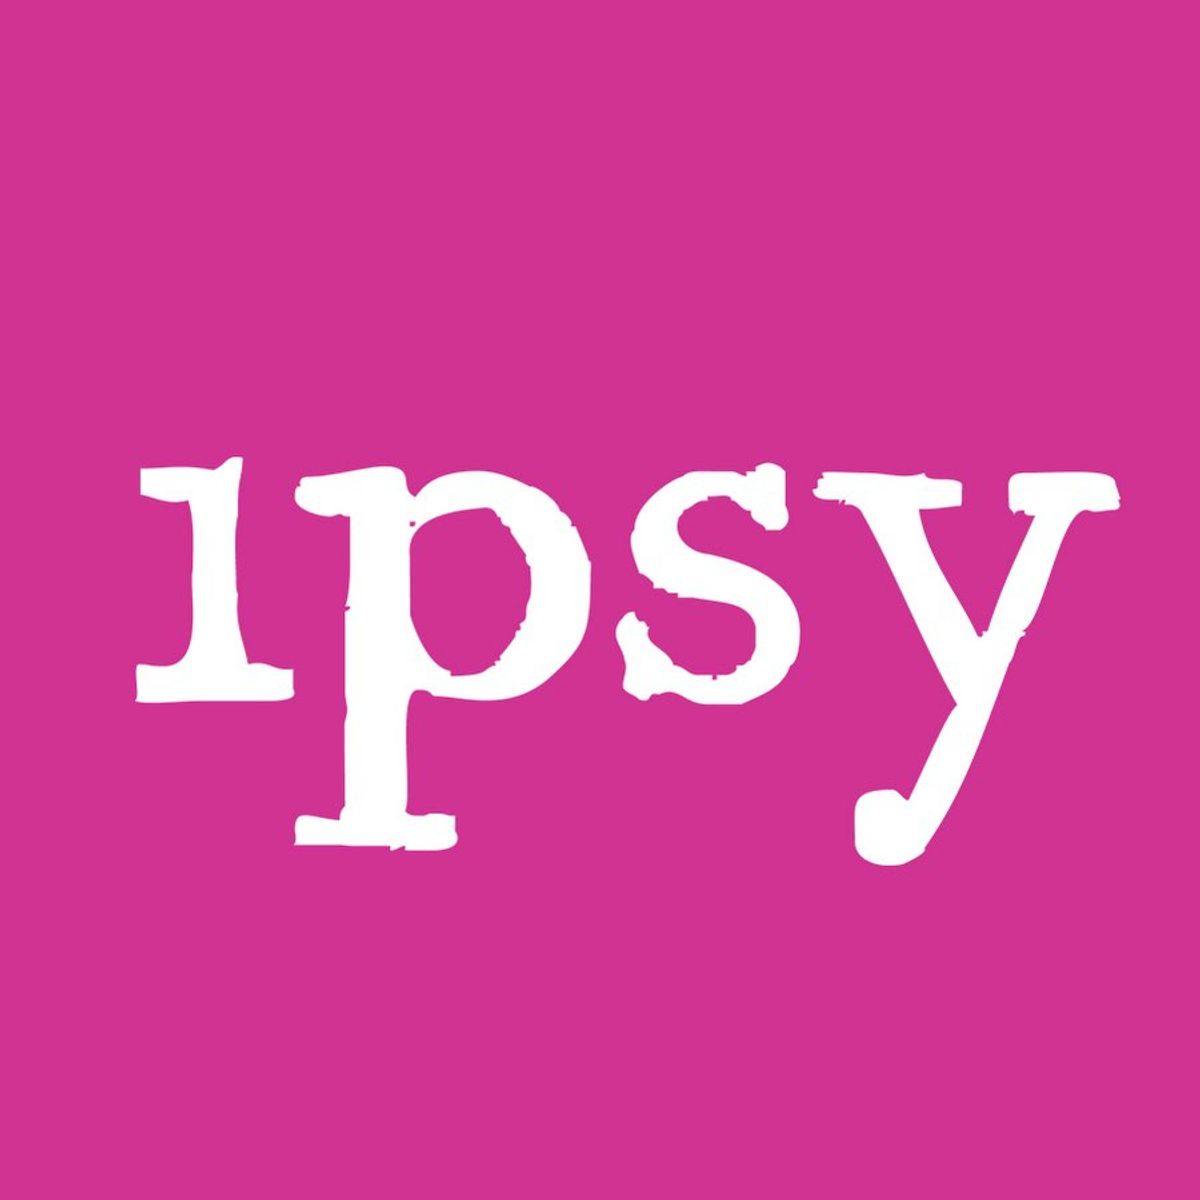 My First Ipsy Box Review